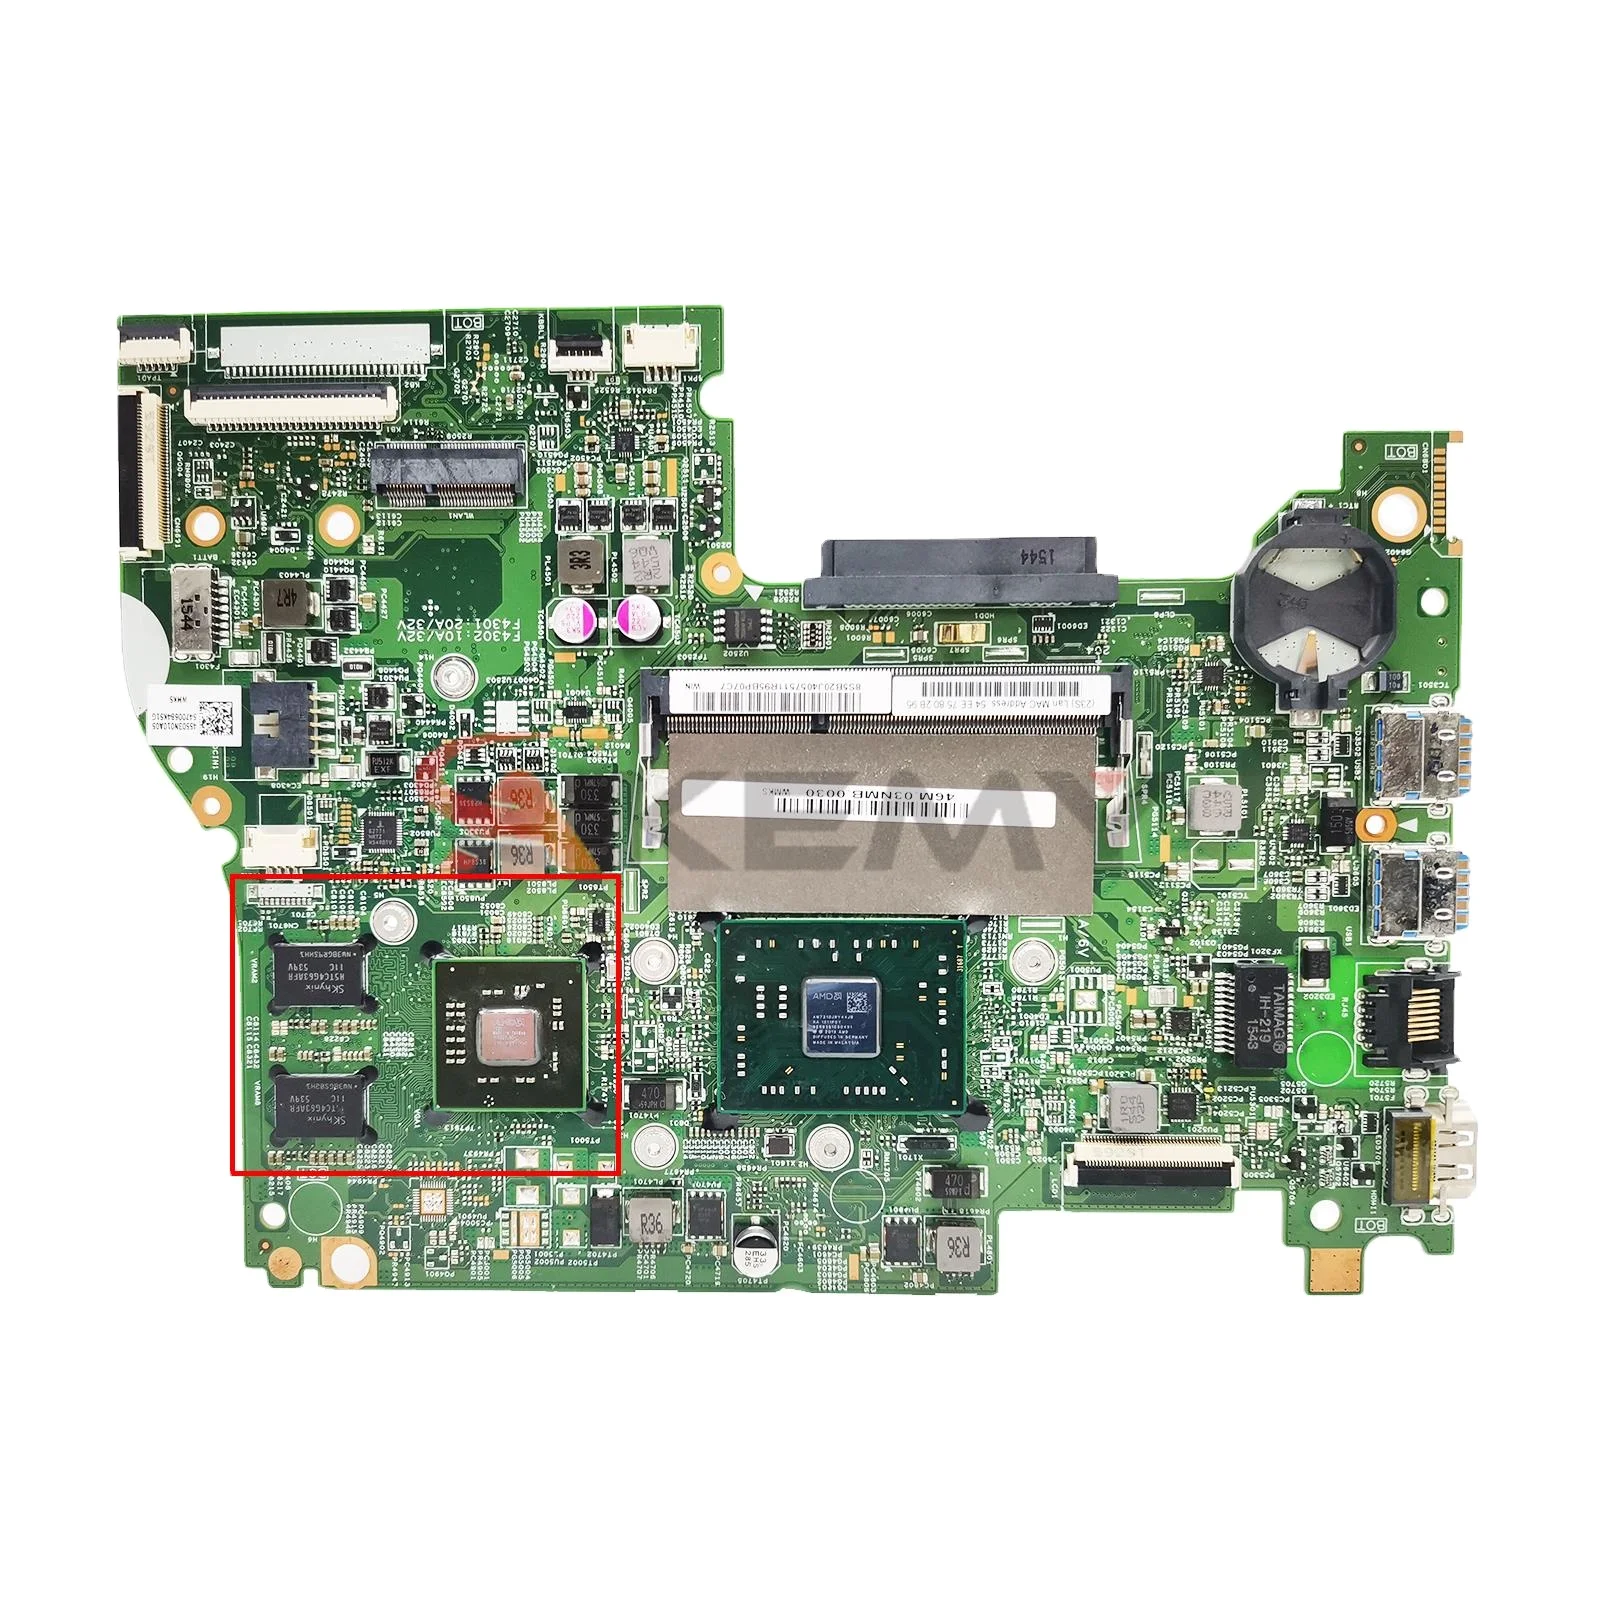 

14235-1 488.03N04.0011 For lenovo S41-75 S41-35 laptop motherboard With A4-7210 CPU R5 M330 2G GPU LT415-AMD MB mainboard